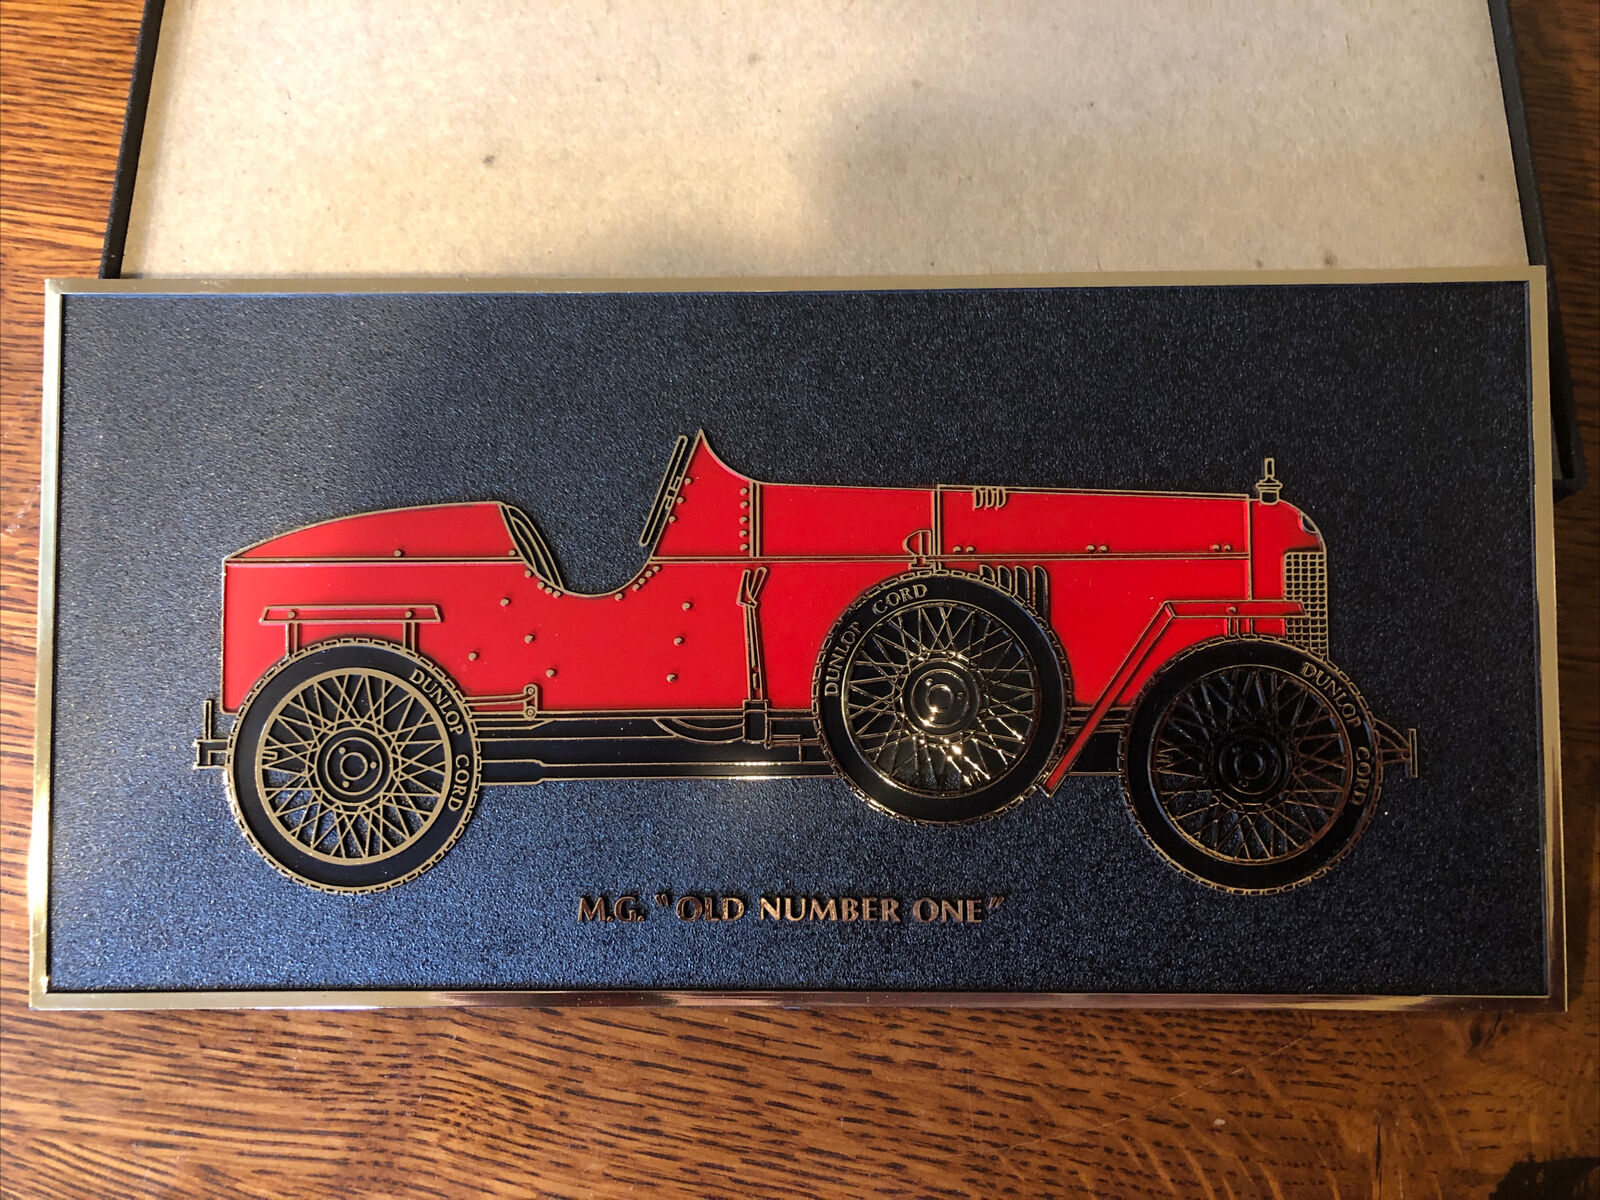 AWESOME Vintage MG Number One Car Plaque